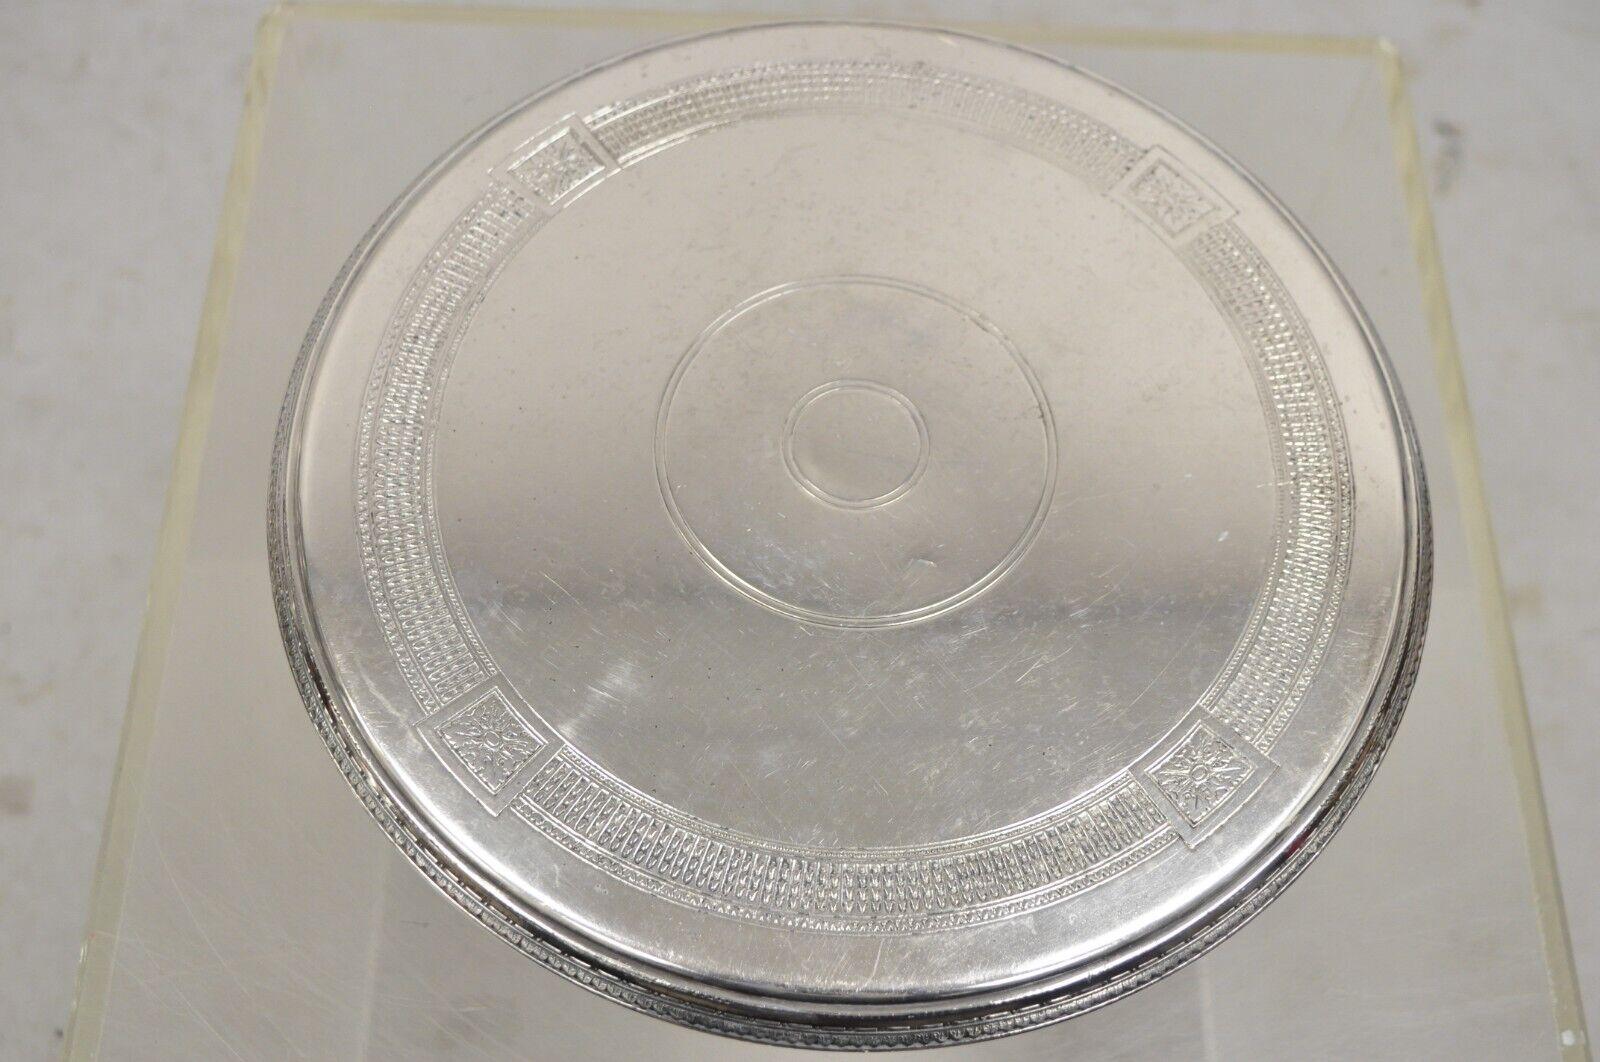 Early 20th Century Pairpoint Antique Edwardian Silver Plated Pedestal Base Cake Stand Platter Plate